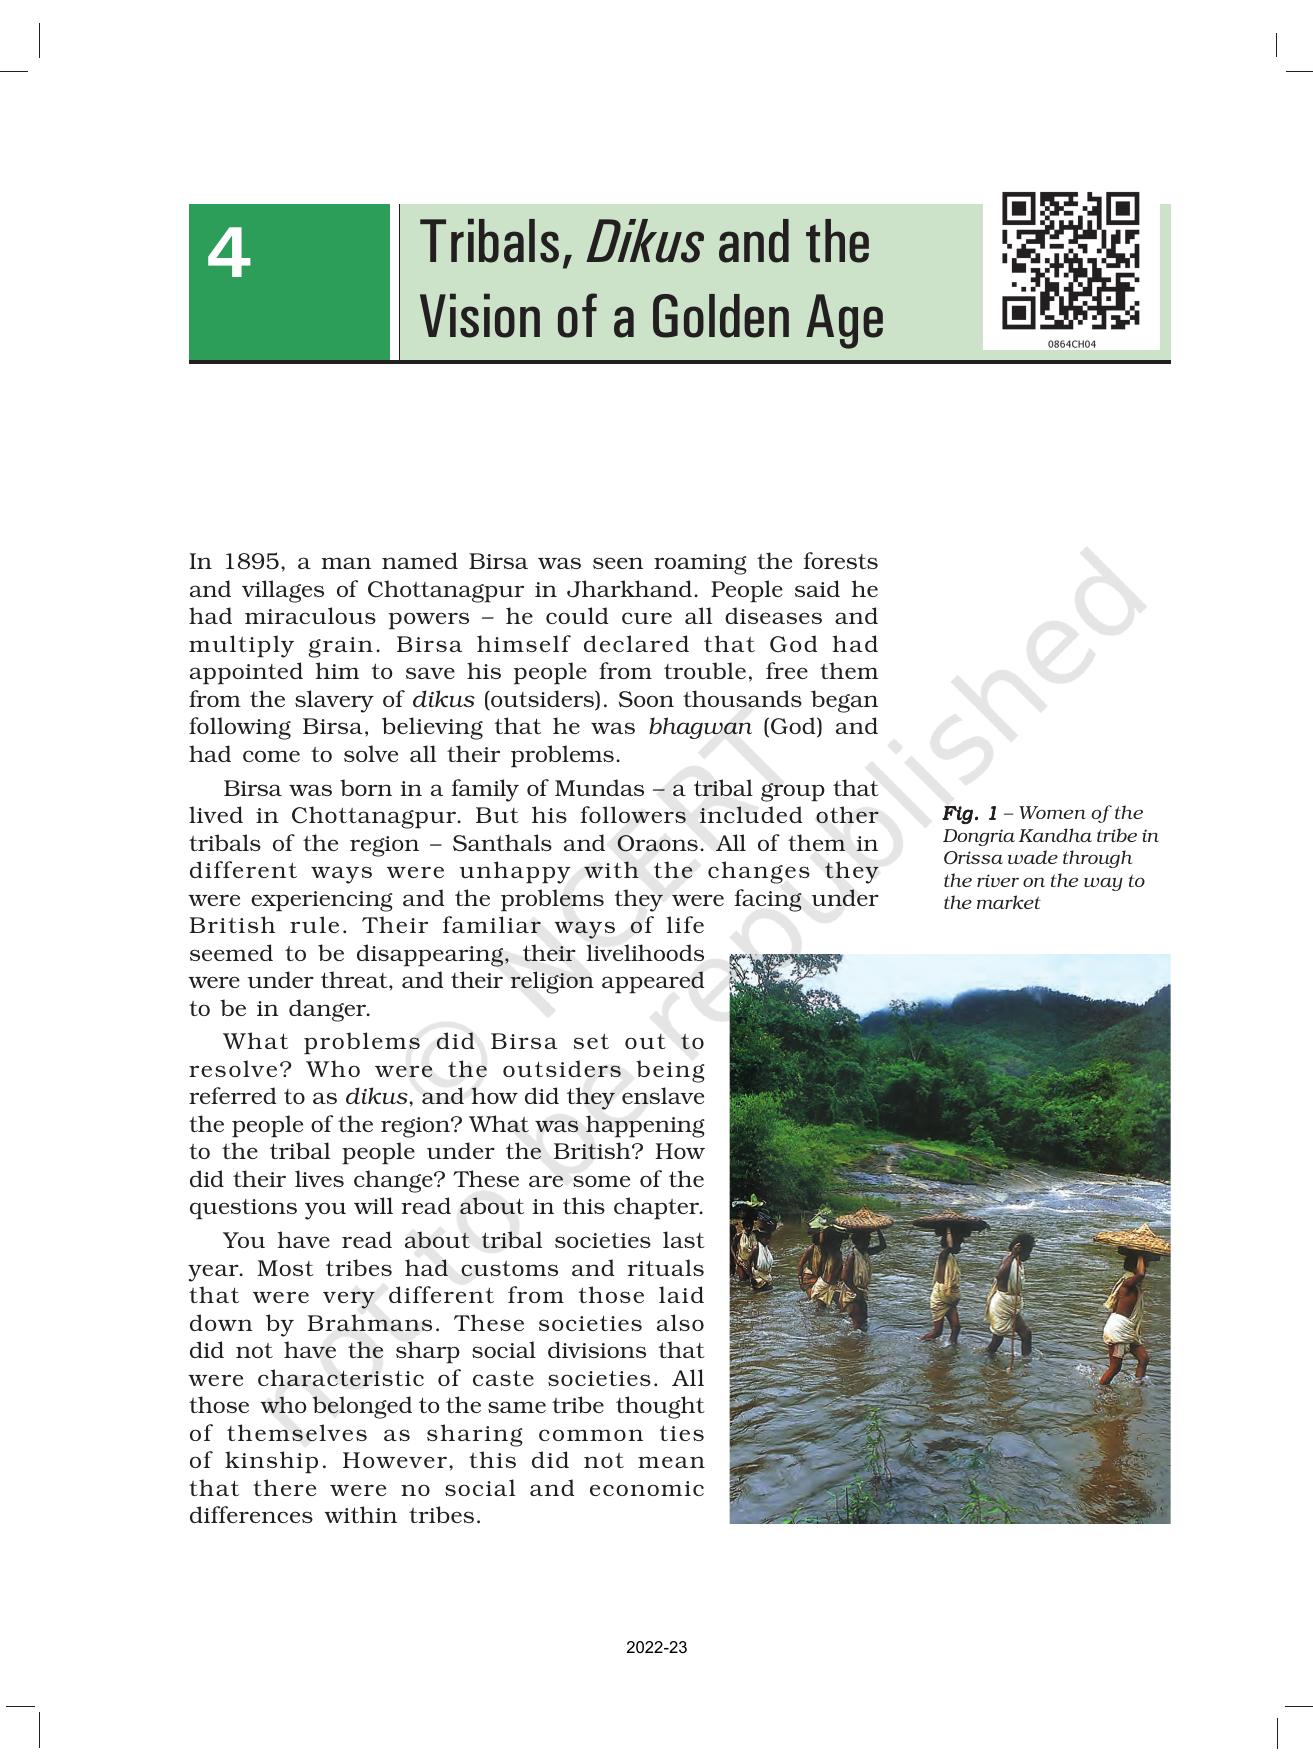 NCERT Book for Class 8 History Chapter 4 Tribals, Dikus and the Vision of a Golden Age - Page 1